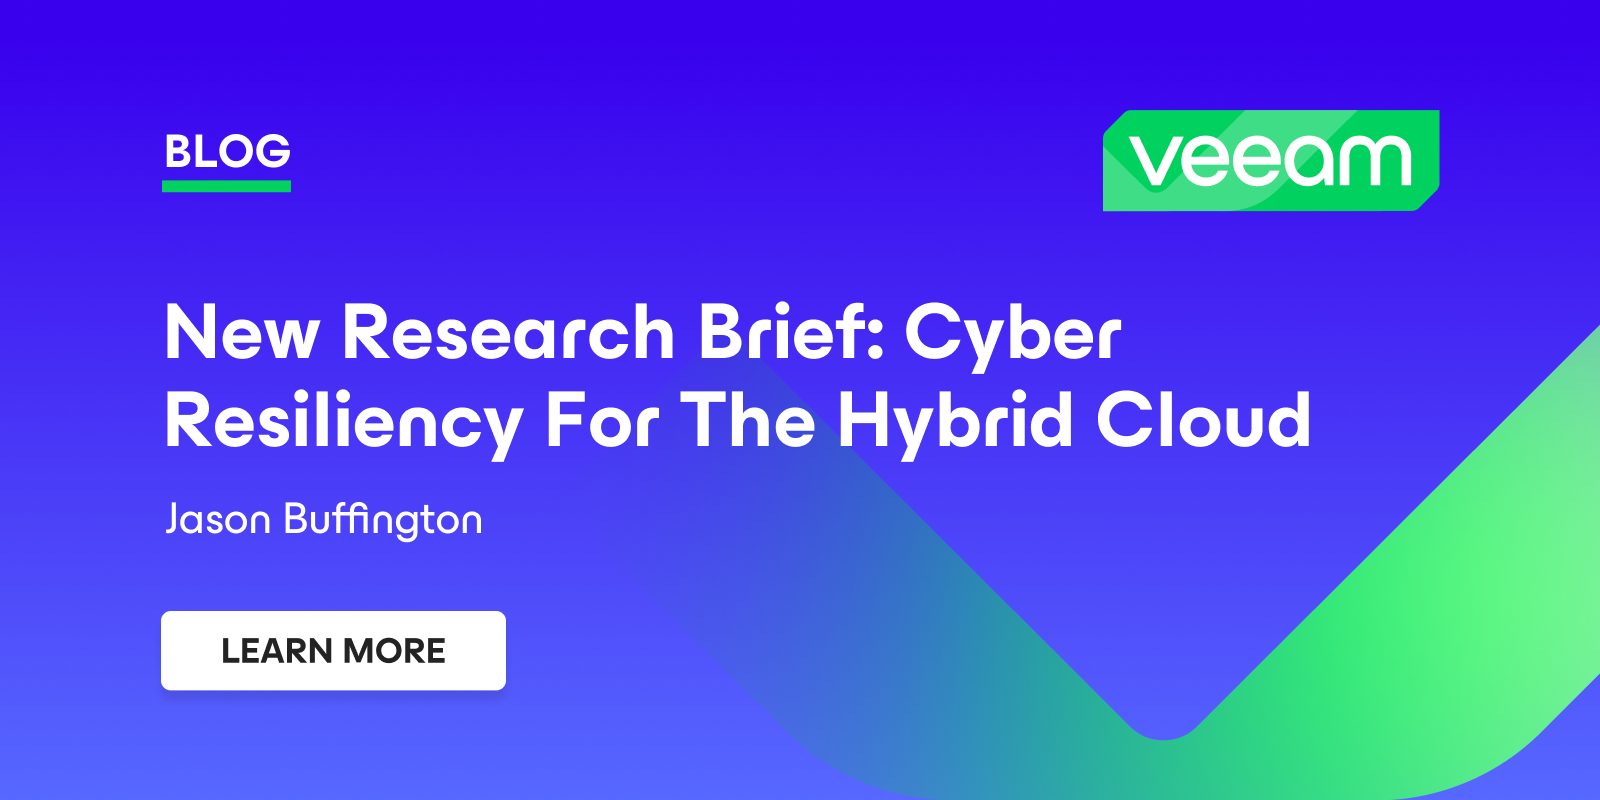 What can you do to improve Cyber Resiliency for your Hybrid Clouds